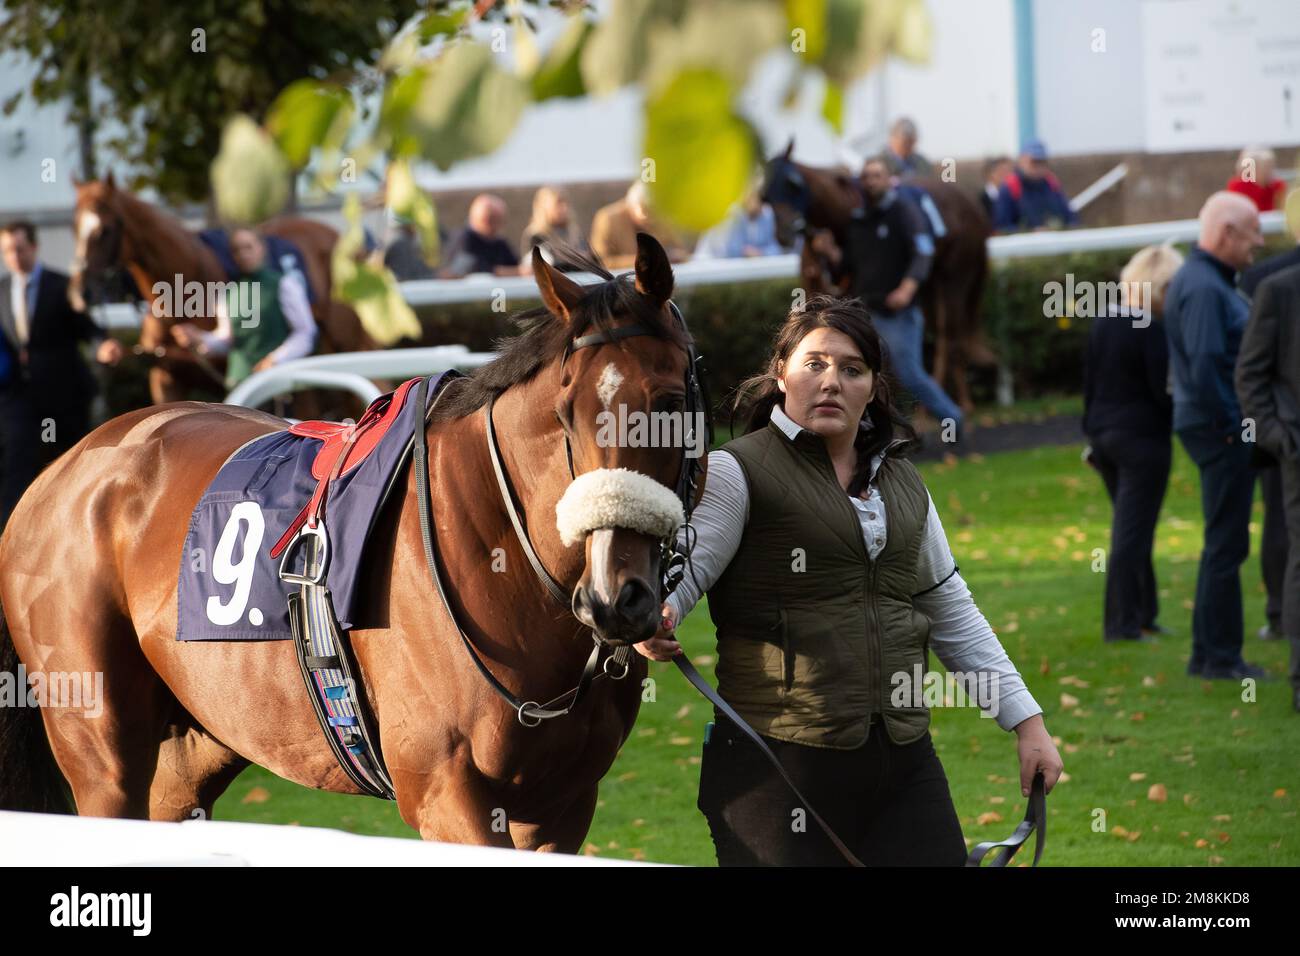 Windsor, Berkshire, UK. 3rd October, 2022. Horse Thapa VC in the Parade Ring before the Sky Sports Racing HD Virigin 535 Handicap Stakes (Class 4) at Windsor Racecourse. Credit: Maureen McLean/Alamy Stock Photo